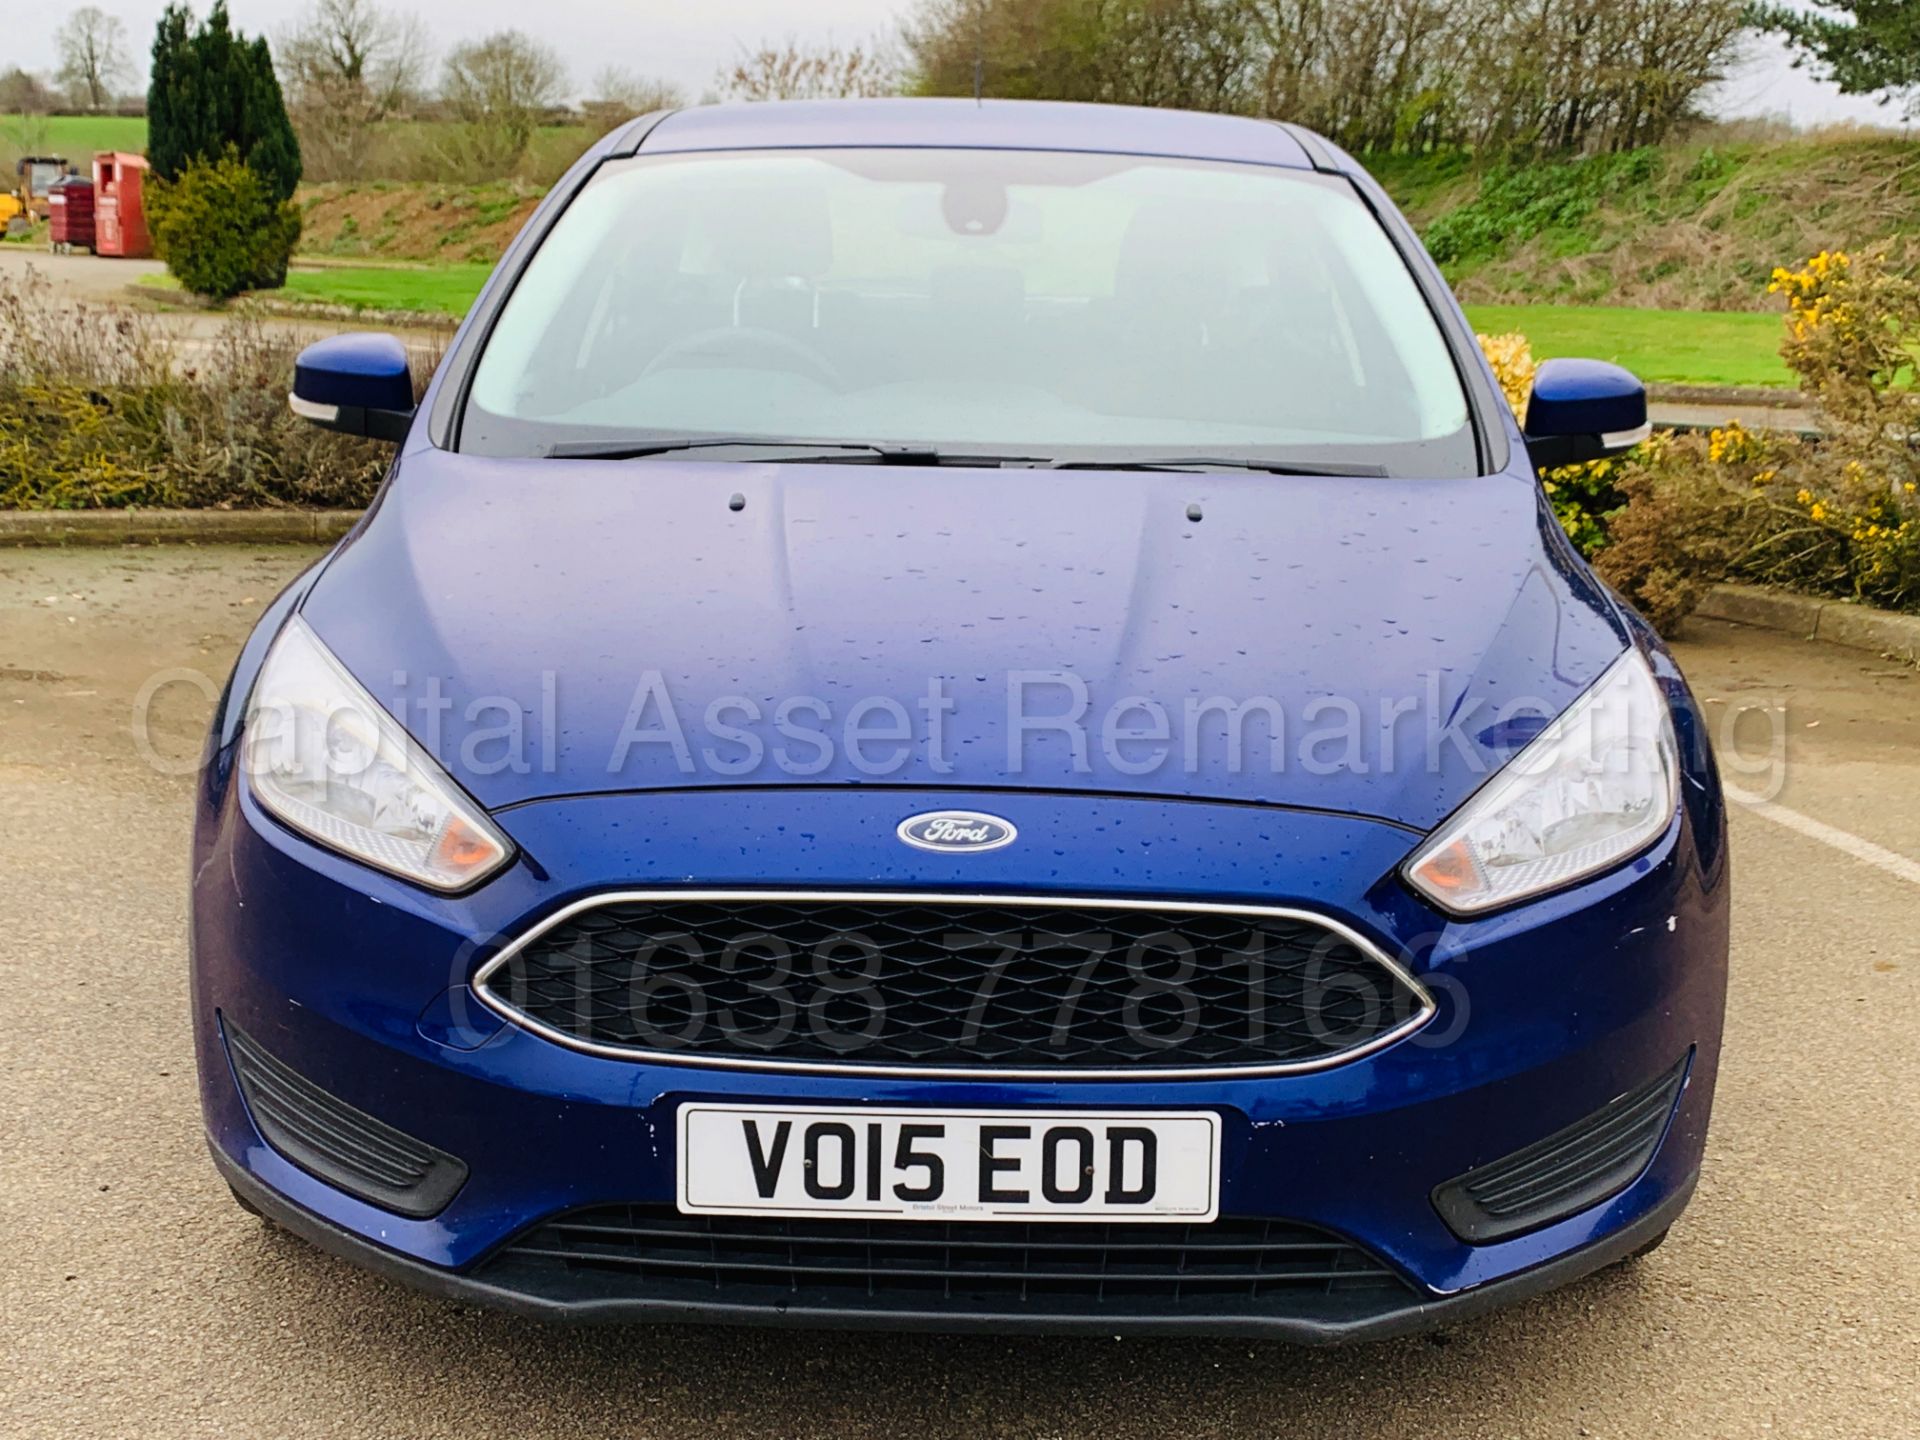 FORD FOCUS *STYLE* 5 DOOR HATCHBACK (2015-NEW MODEL) '1.5 TDCI-6 SPEED' (1 OWNER FROM NEW) *SAT NAV* - Image 3 of 39